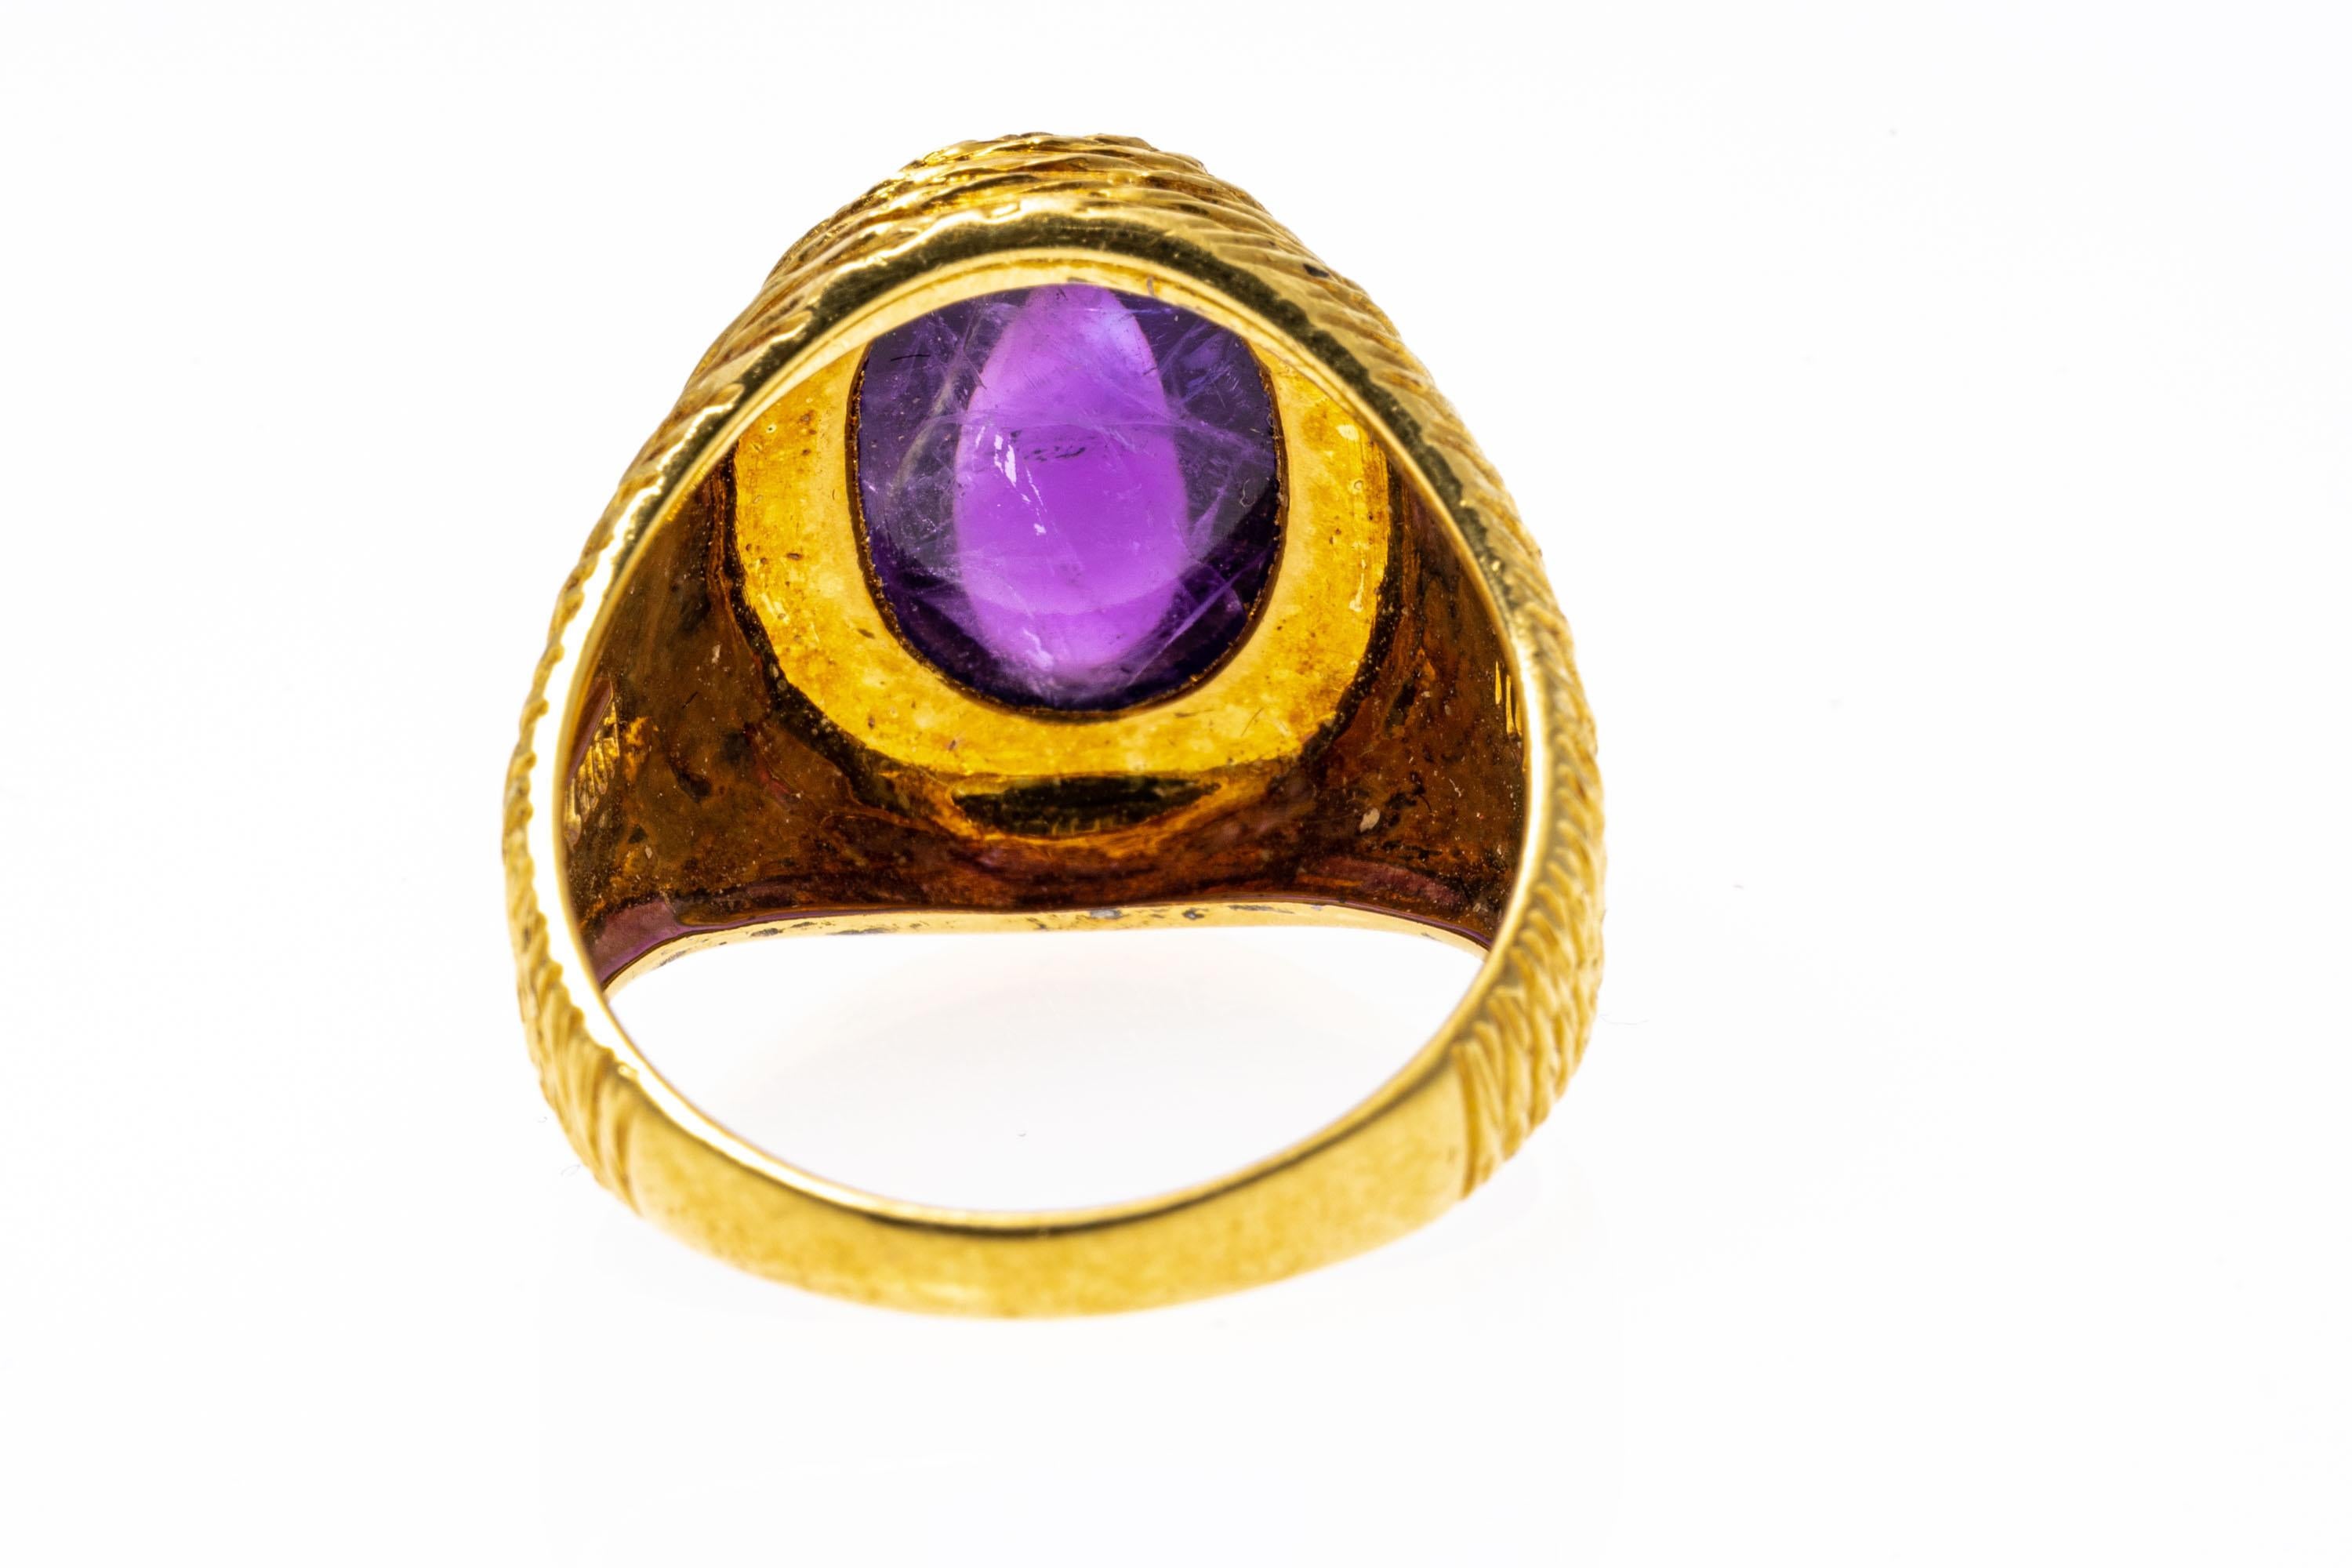 18k yellow gold ring. This handsome ring features an oval, dark purple color amethyst cabochon center, approximately 4.2 CTS, bezel set into a wide, fine matte rope patterned setting.
Marks: 18k
Dimensions: 5/16